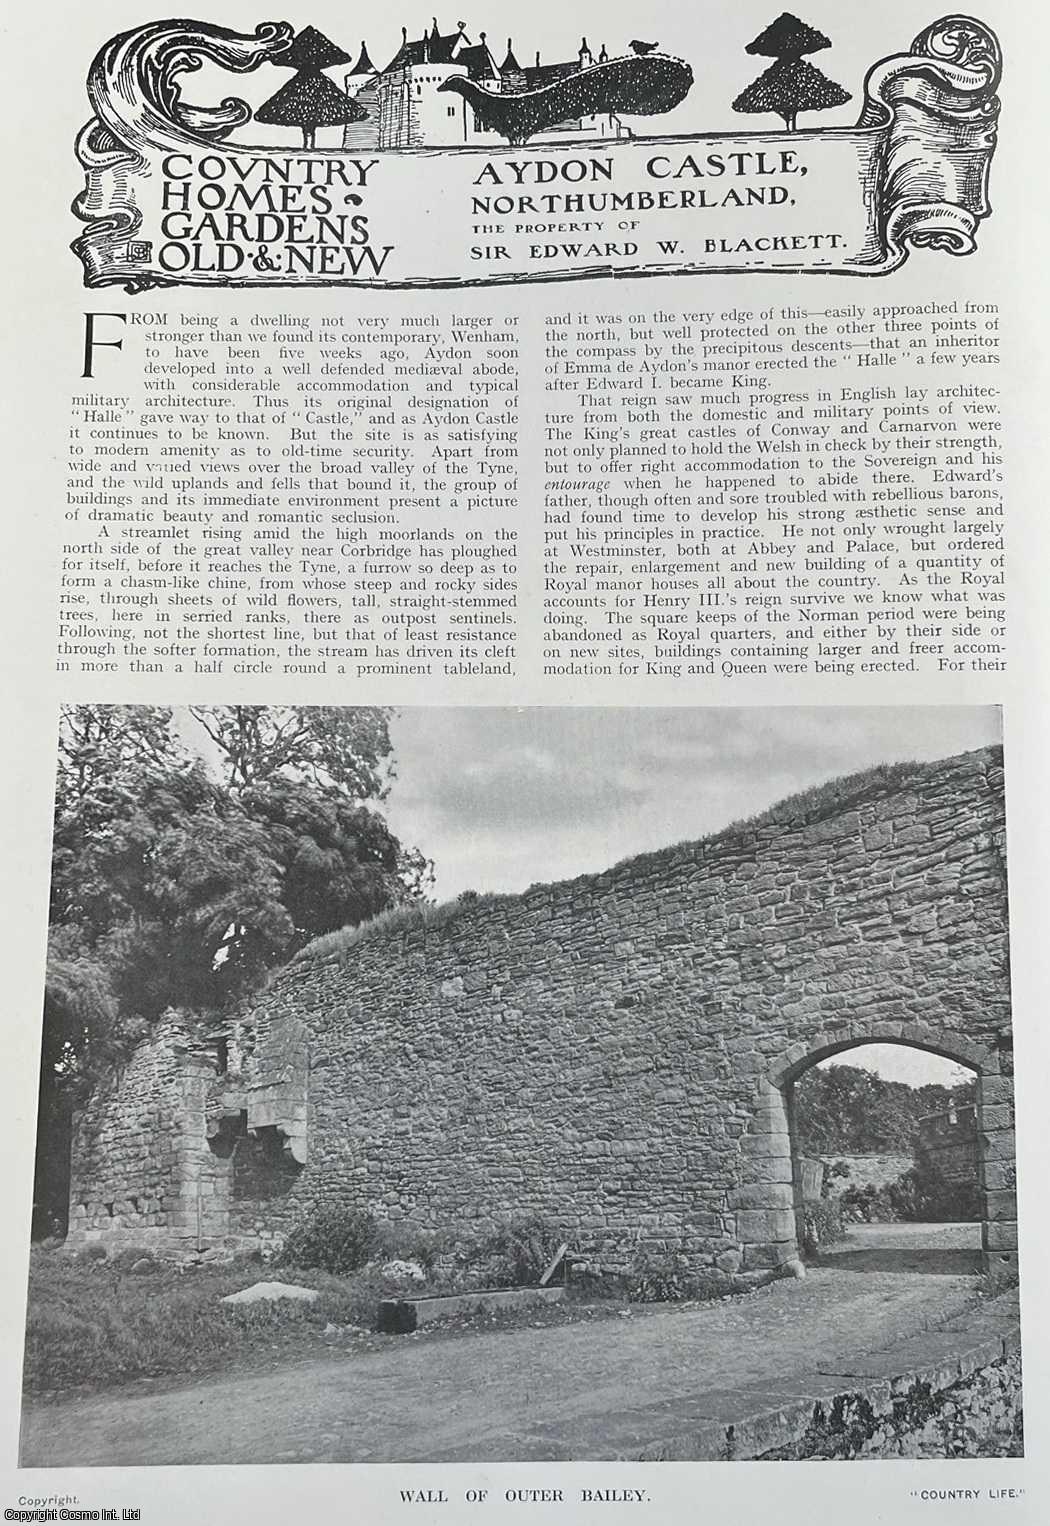 Country Life Magazine - Aydon Castle, Northumberland. The Property of Sir Edward W. Blackett. Several pictures and accompanying text, removed from an original issue of Country Life Magazine, 1914.